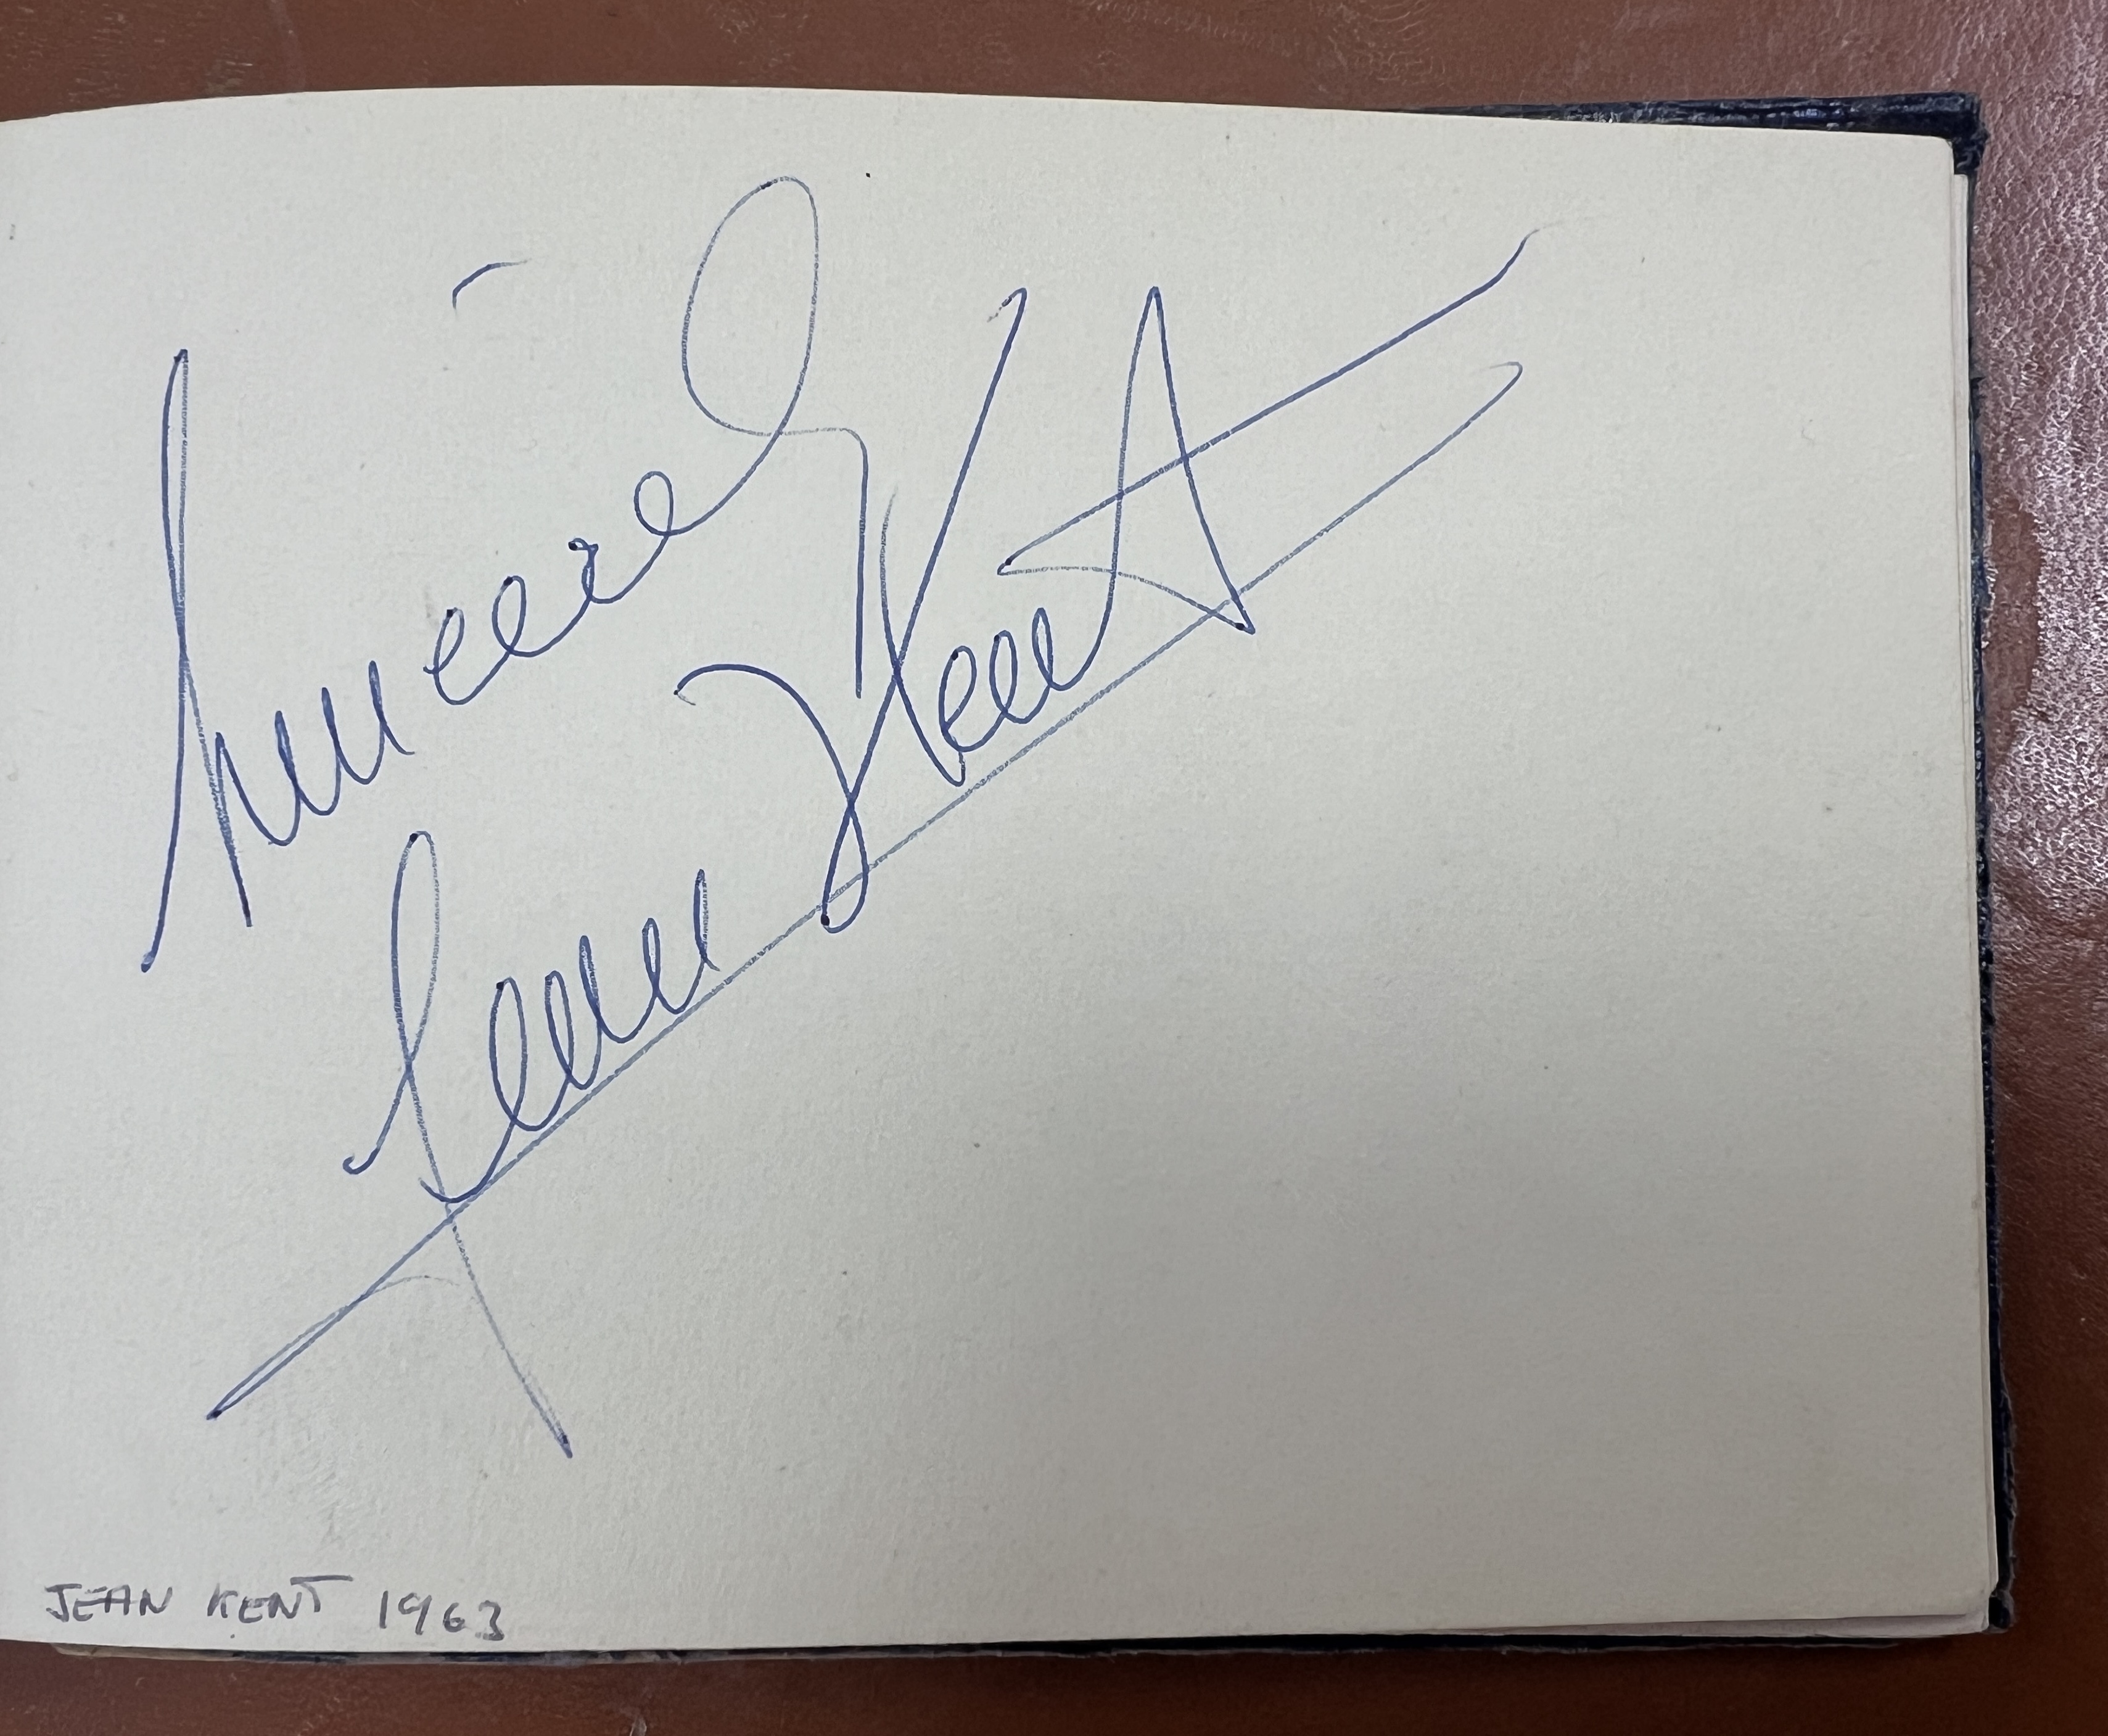 A 1960's autograph album containing autographs of various celebrities including Cliff Richard, - Image 25 of 37